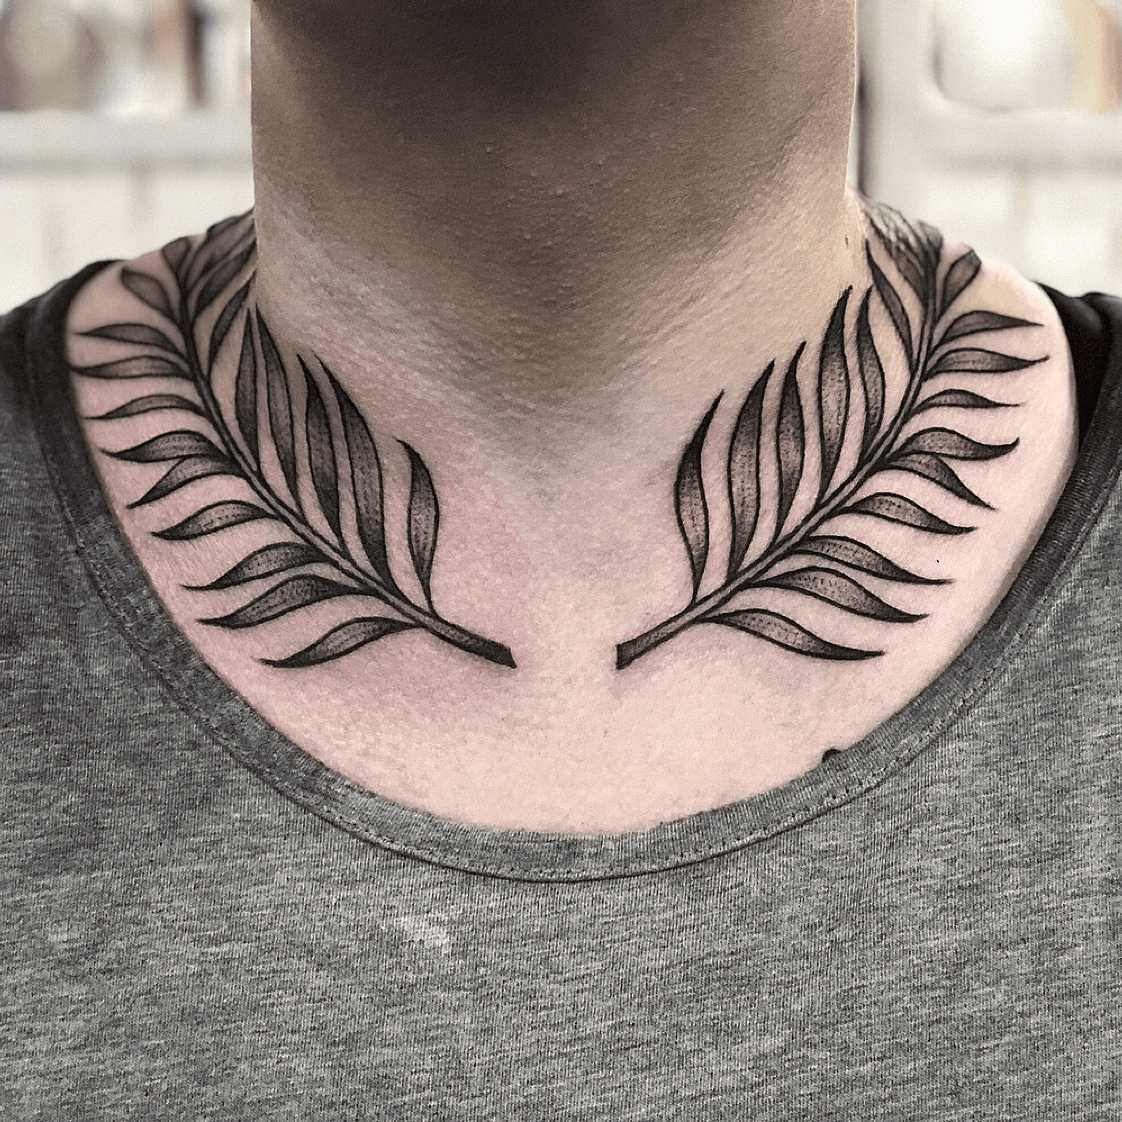 Fern leaf tattoo on the left side of the neck behind